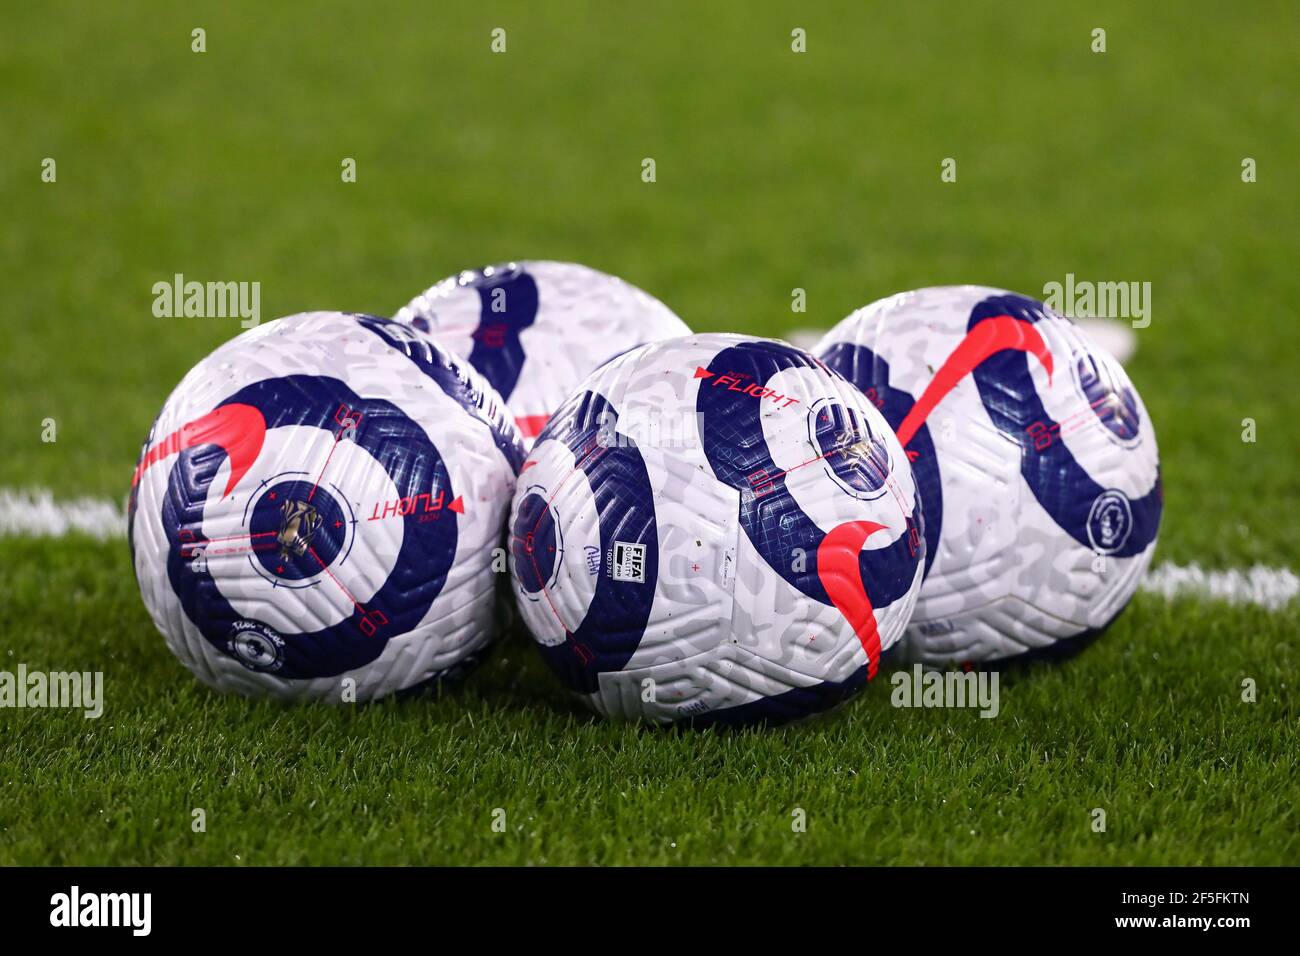 Official Premier League 2020/21 Blue and White Nike Flight match balls - West Ham United v Leeds United, Premier League, London Stadium, London, UK - 8th March 2021  Editorial Use Only - DataCo restrictions apply Stock Photo